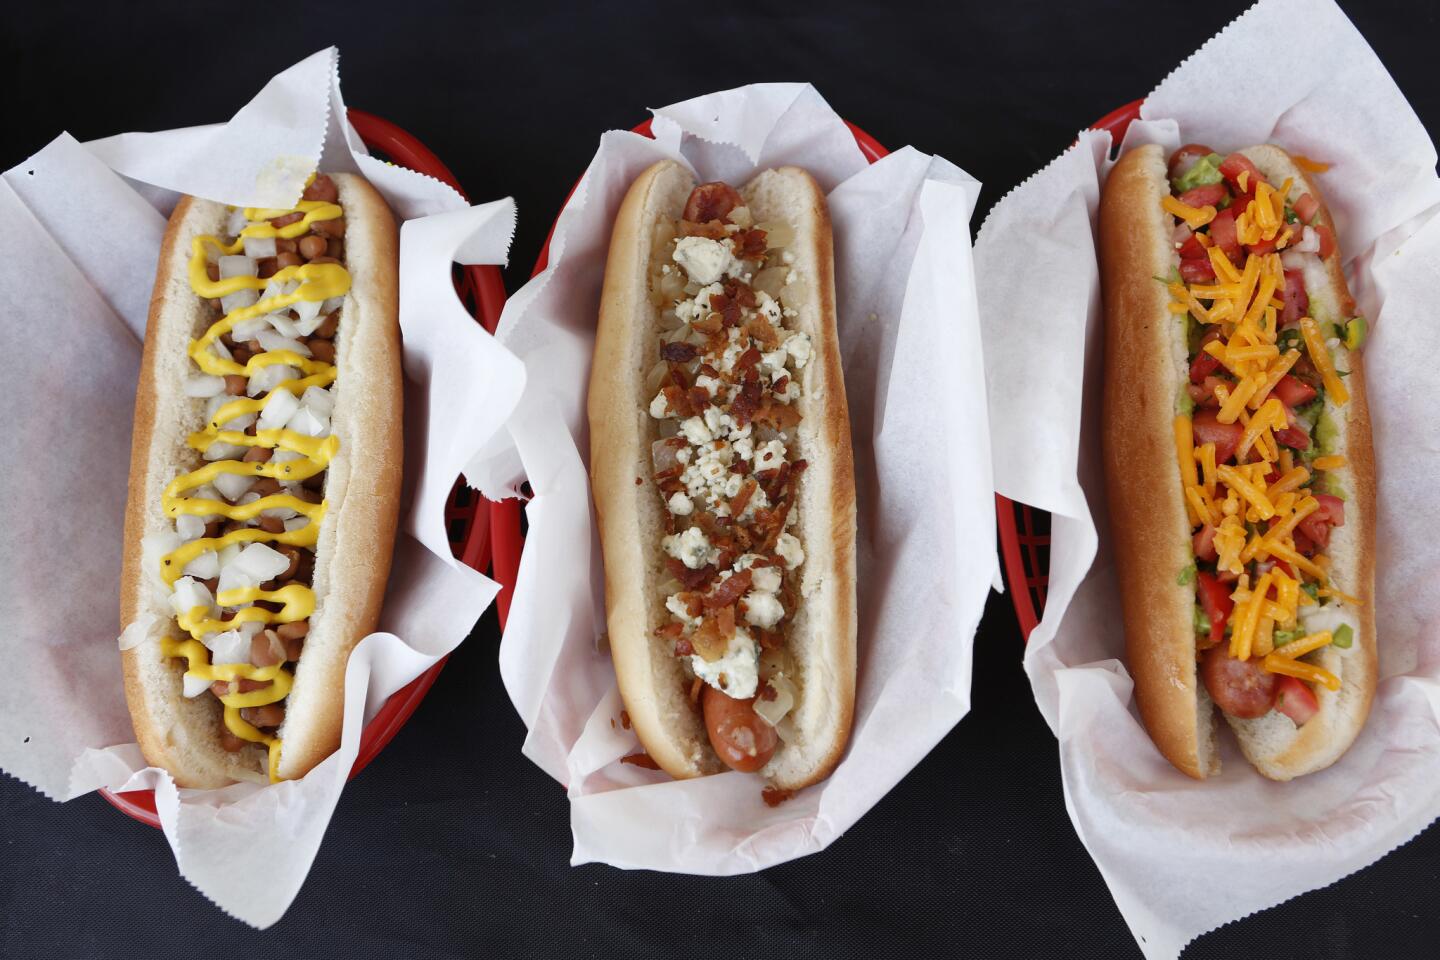 The Boston Celtic, from left, the Blue Dog, and the Nacho dog are some of the hot dogs offered at Tail O' the Pup, a truck specializing in hot dogs. The truck is part of the relaunch of the brand, which began in 1946 with a stand selling hot dogs.